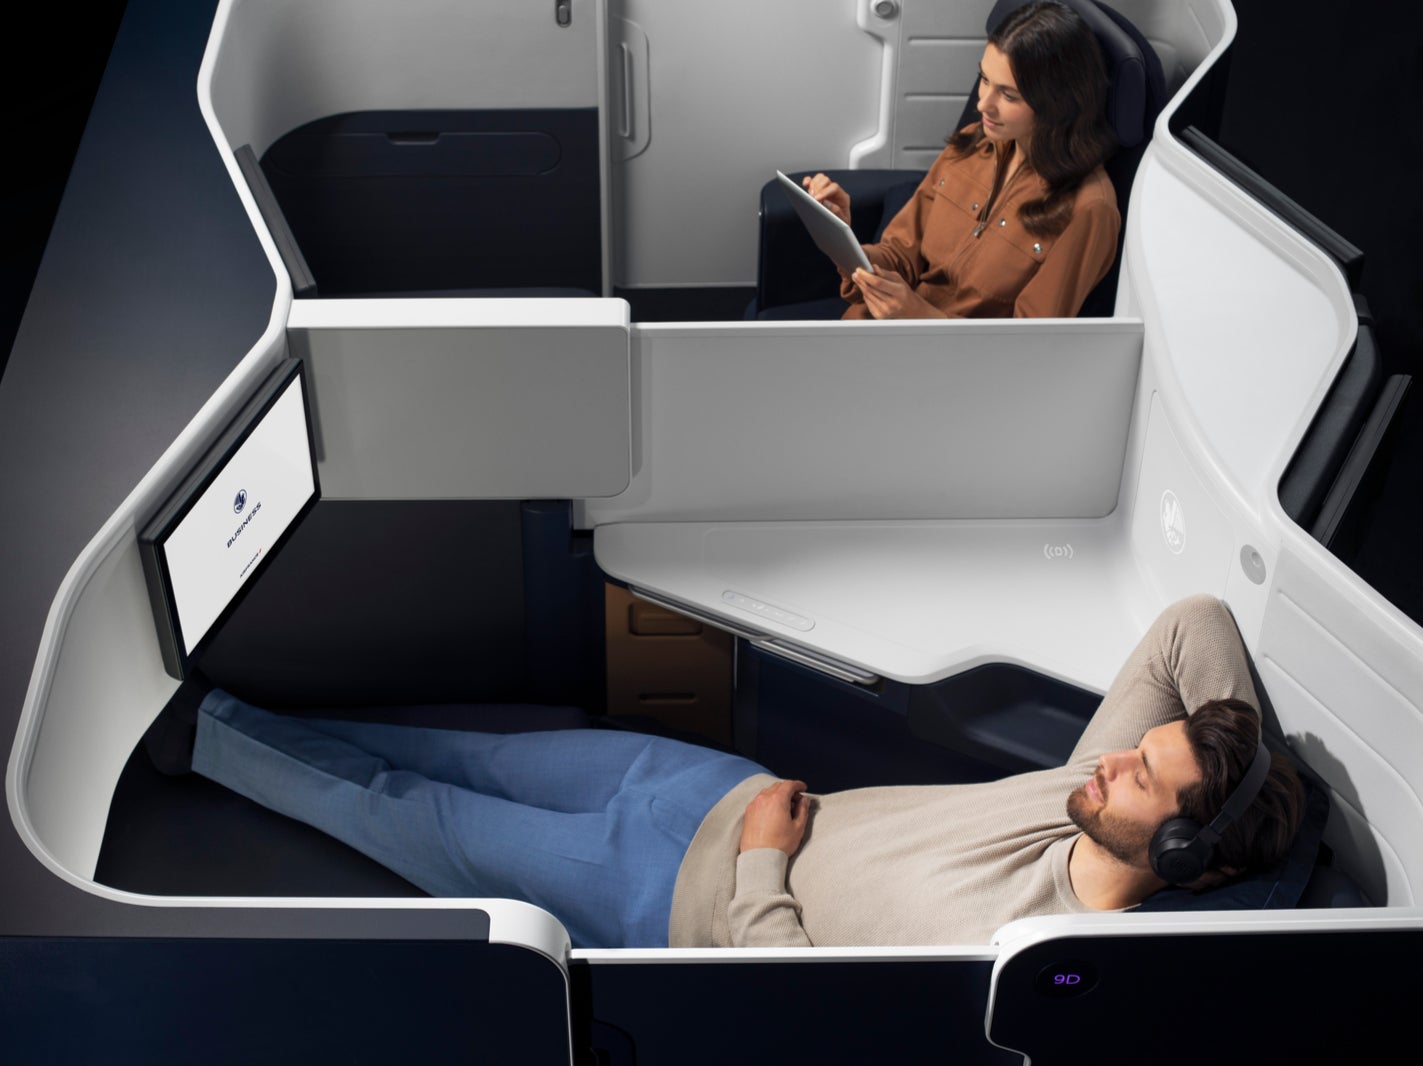 The airline says the new seat ‘marries refinement and privacy’